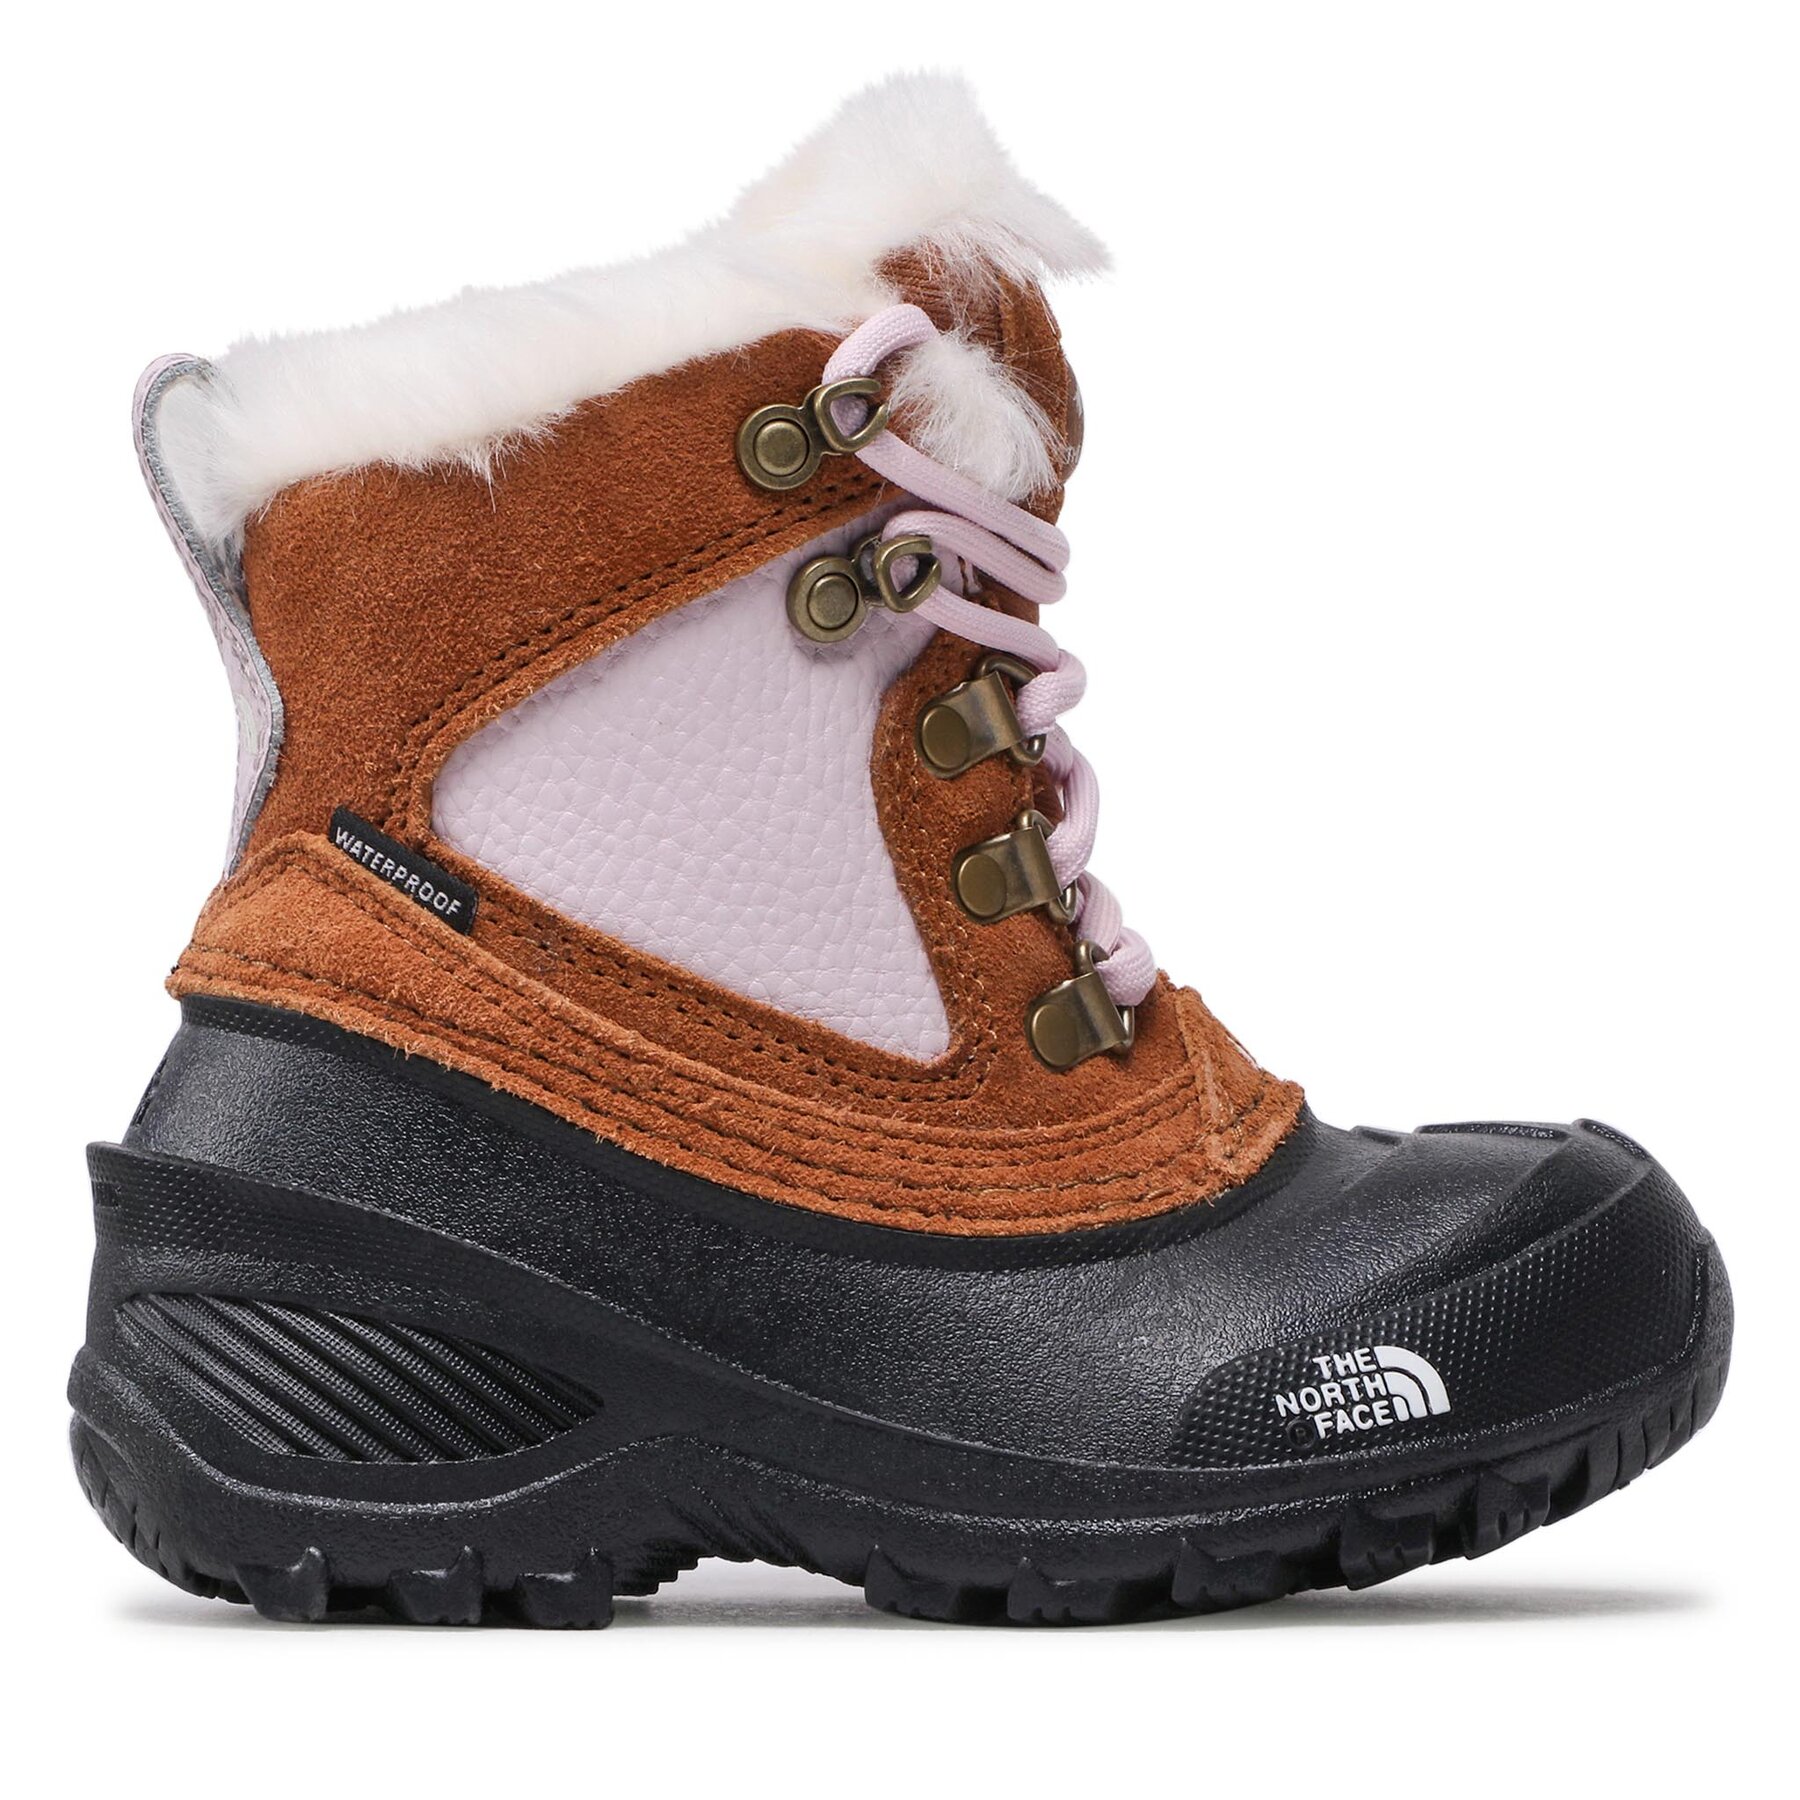 Schneeschuhe The North Face Youth Shellista Extreme NF0A2T5V9ZW1 Toasted Brown/Lavender Fog von The North Face